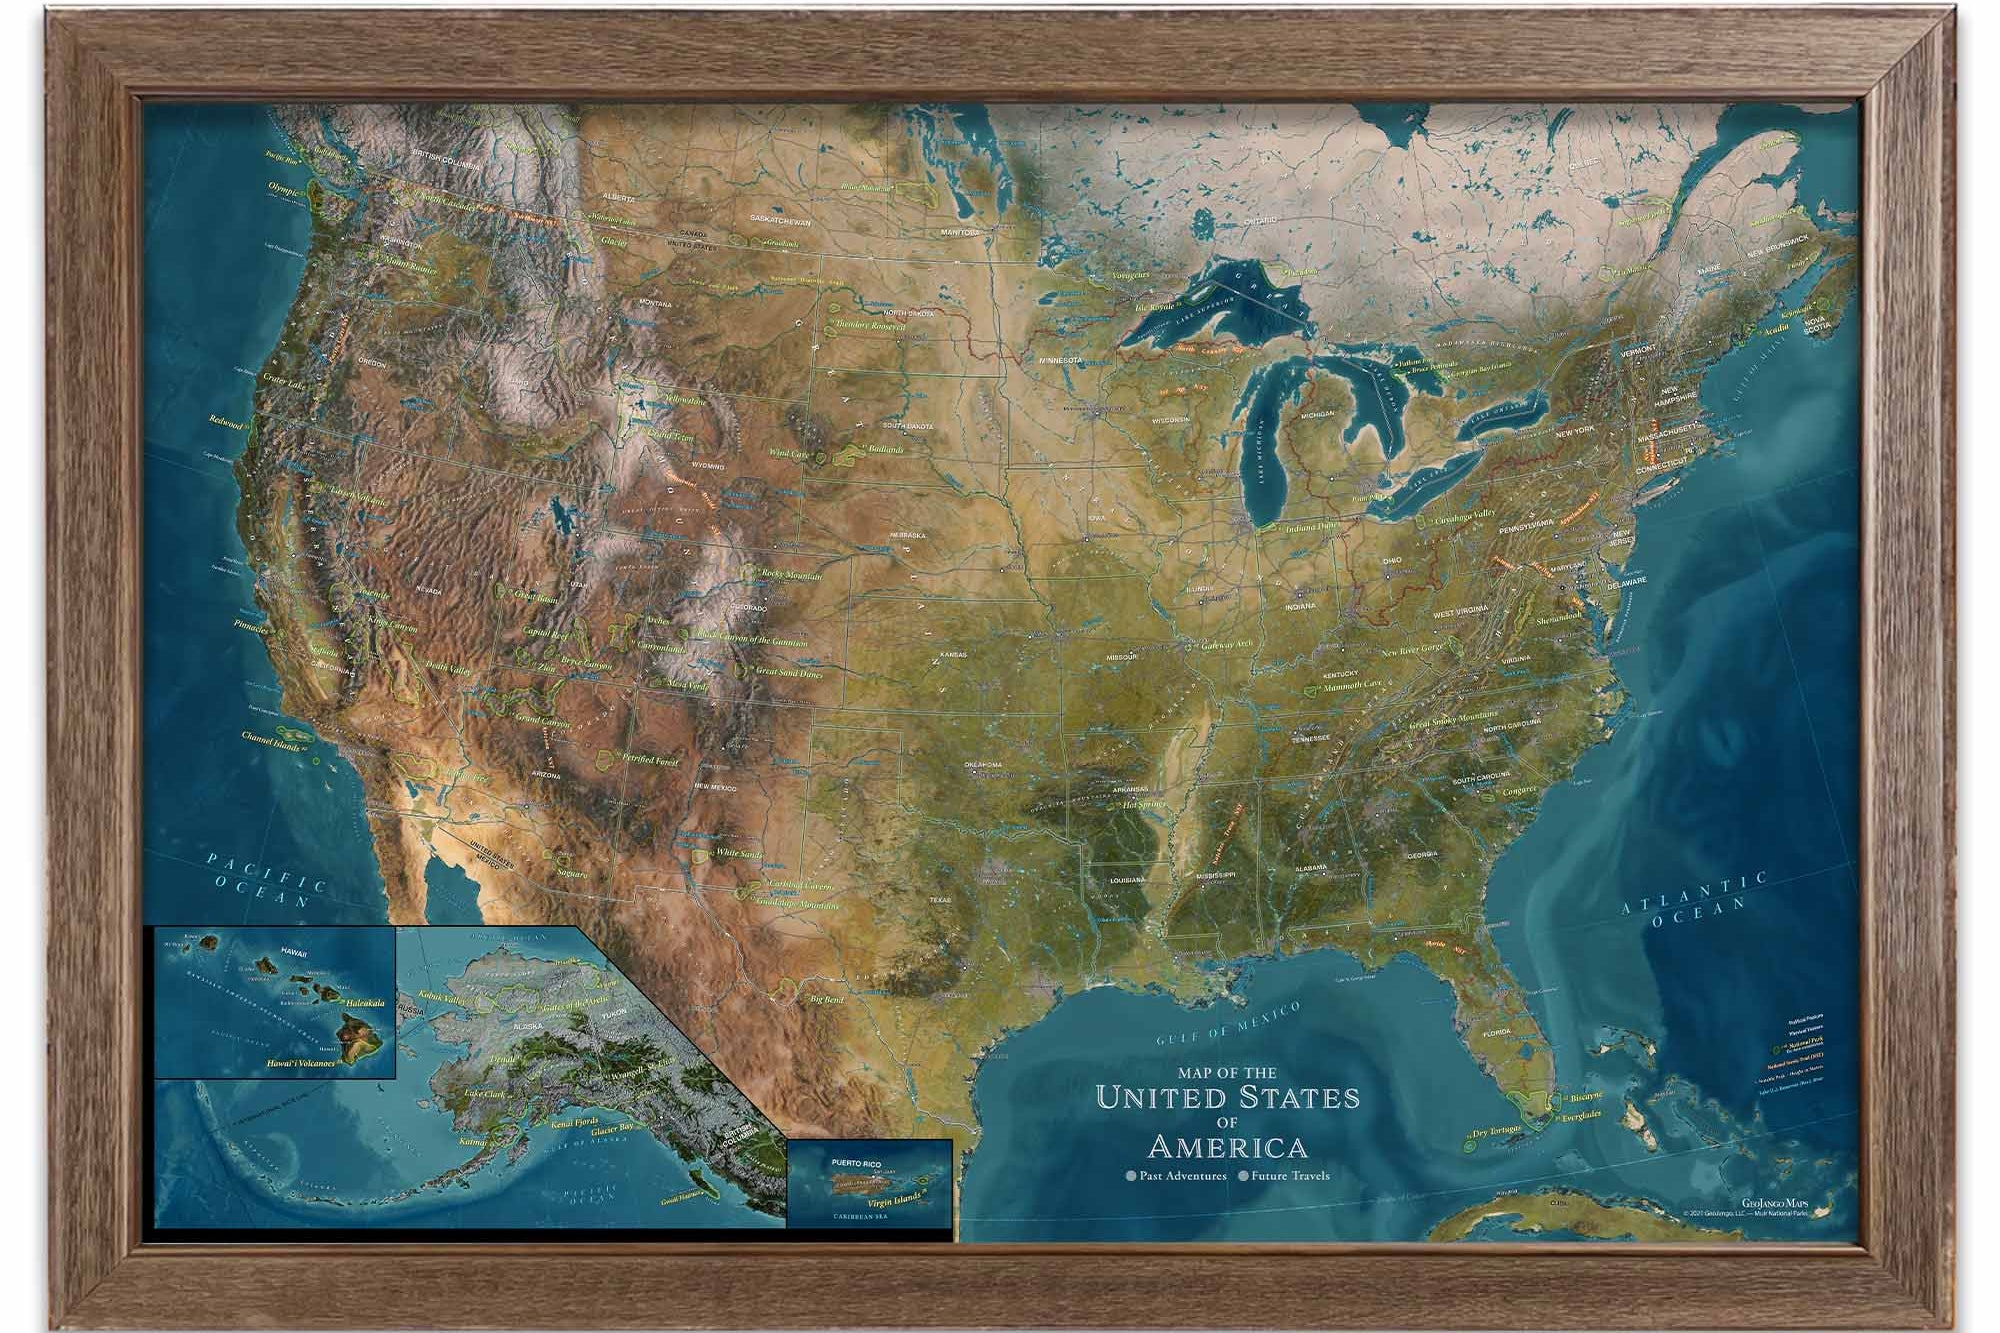 US elevation map featuring National Parks push pin map with states, mountains, rivers, and cities to explore.